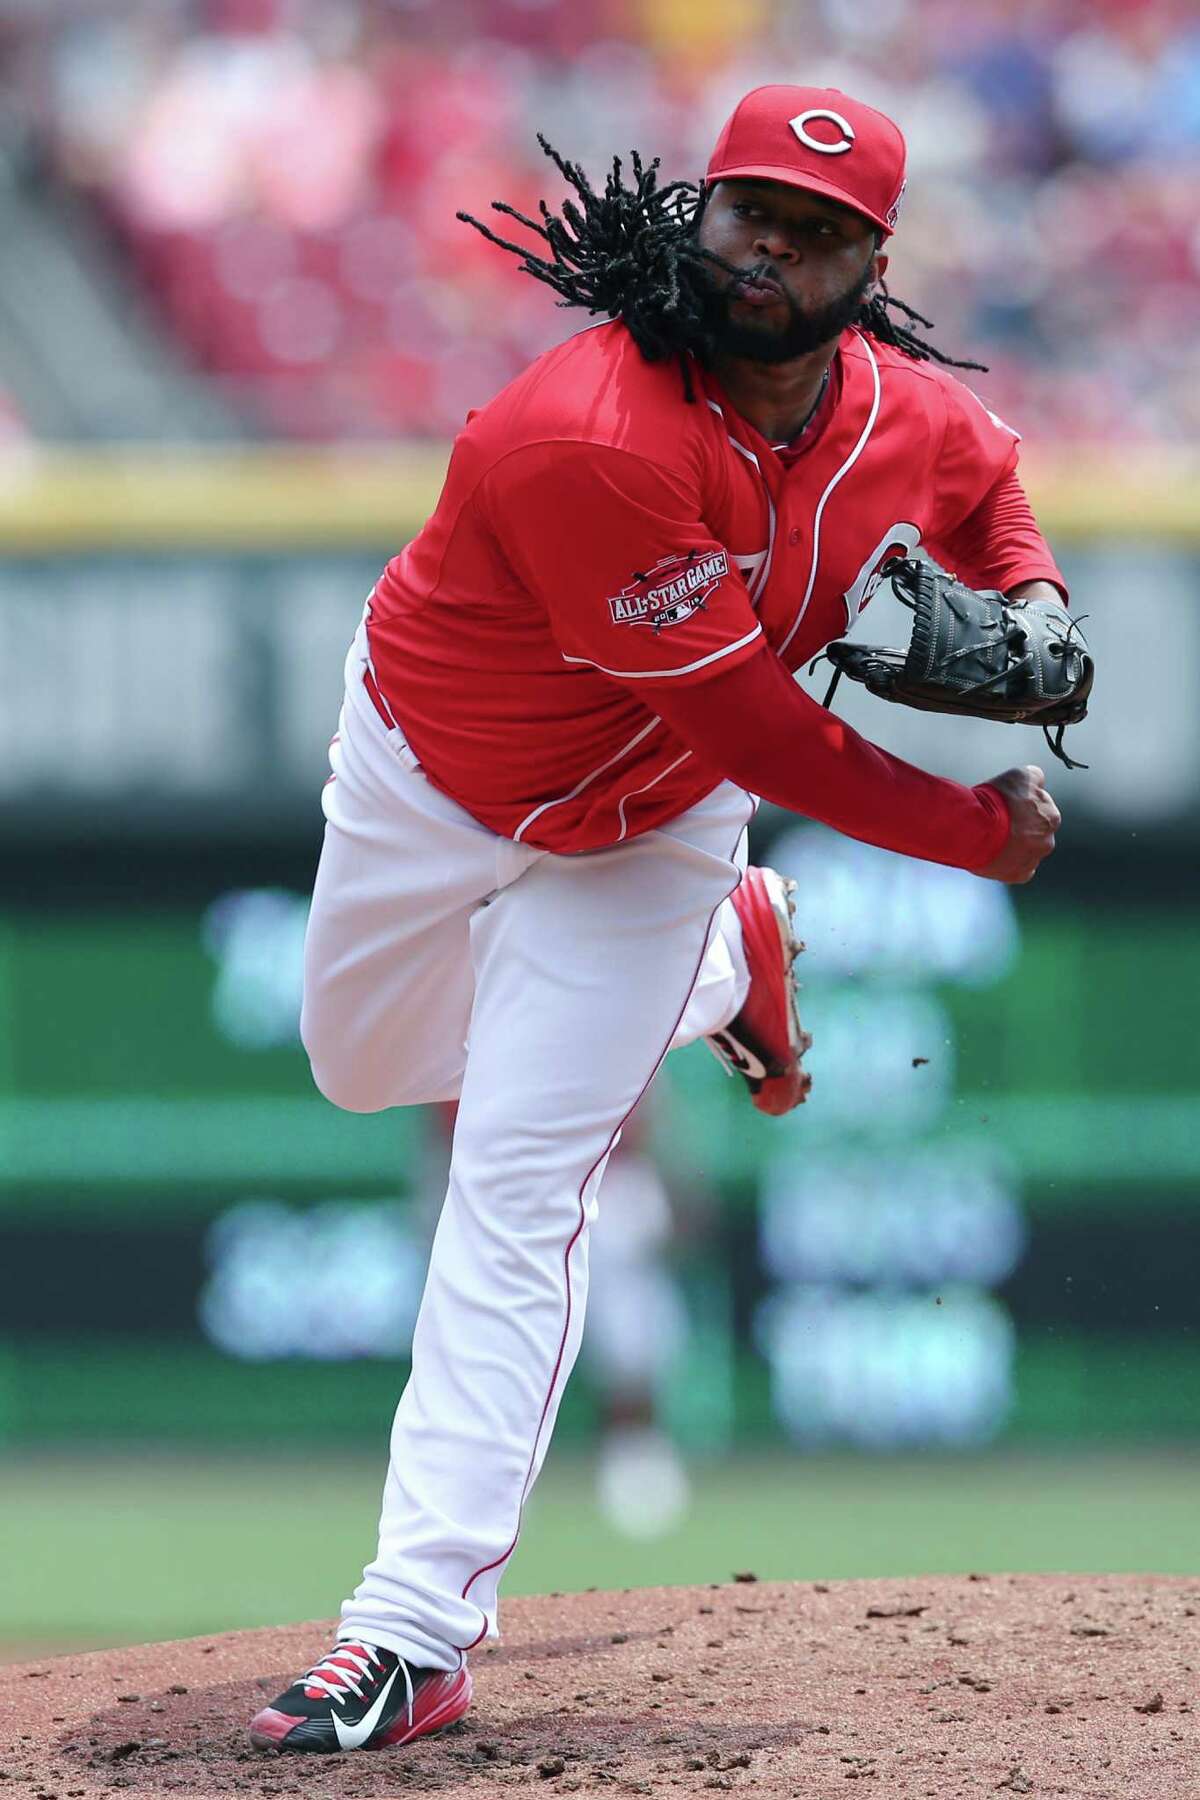 Cincinnati Reds starting pitcher Johnny Cueto throws in the second inning of a baseball game against the Minnesota Twins, Wednesday, July 1, 2015, in Cincinnati. The Reds won 2-1. (AP Photo/John Minchillo)